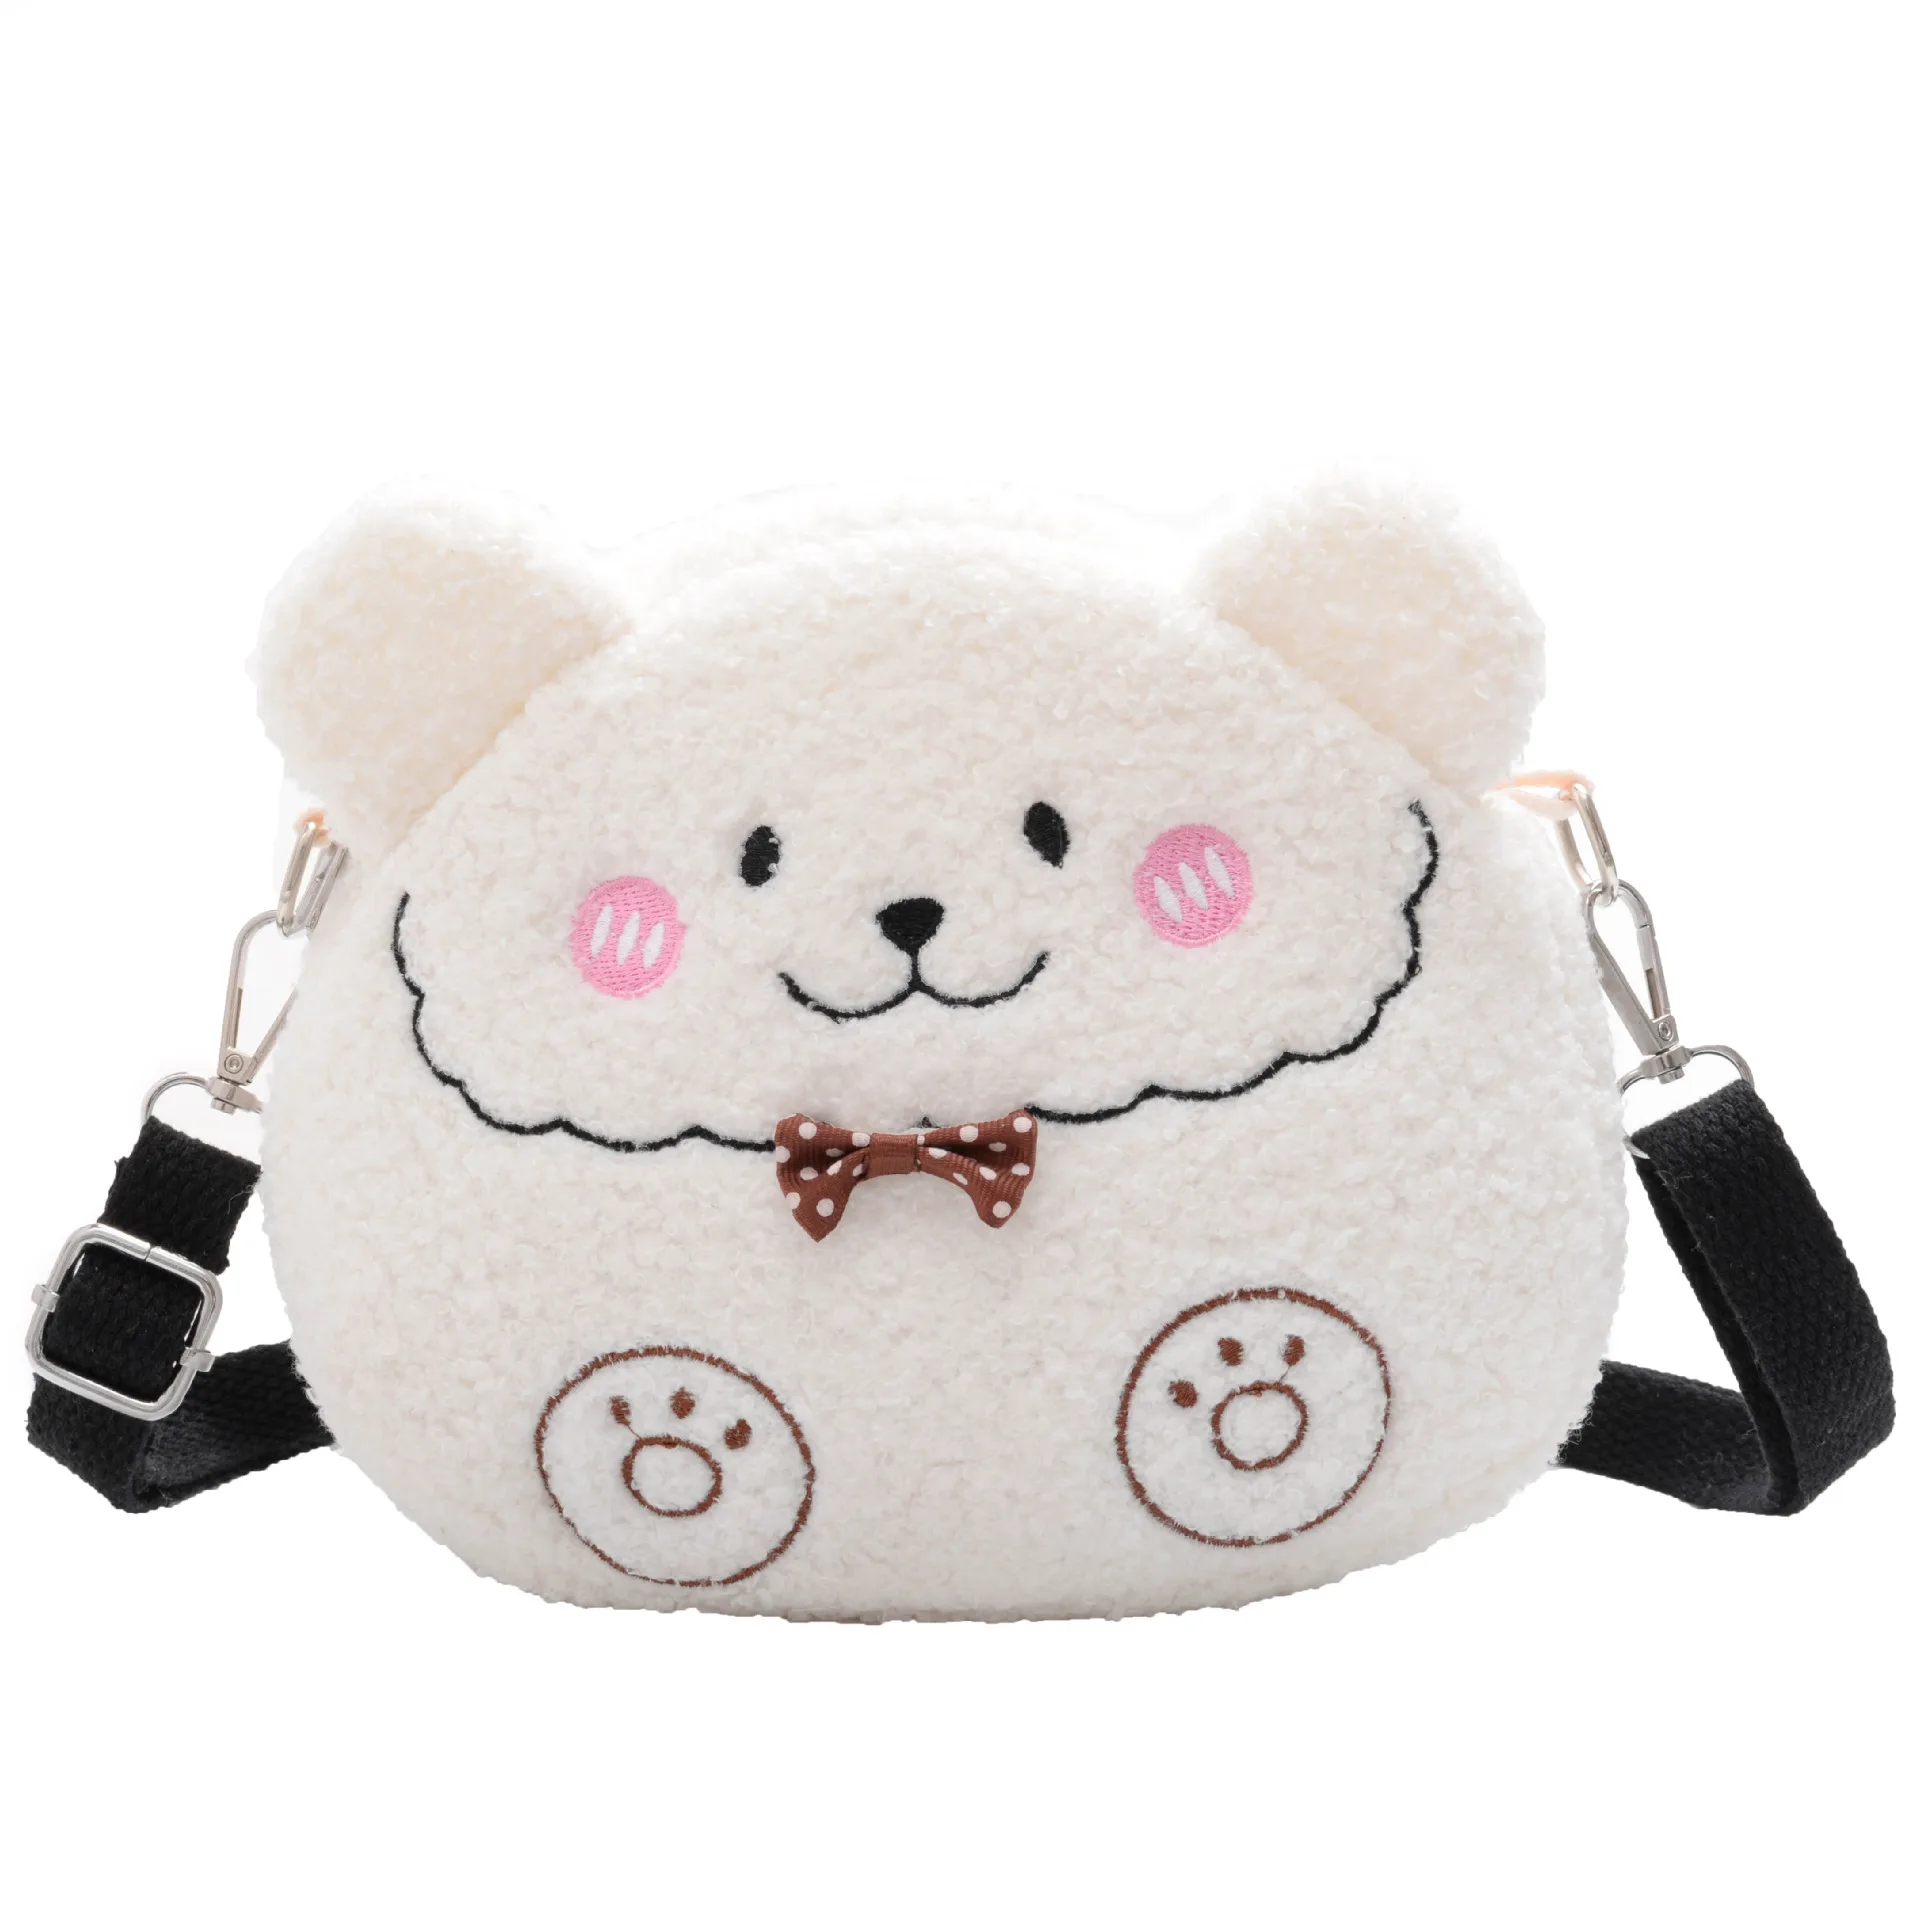 2022 New Fashion Sweet Cartoon 3D Plush Bear Modelling Crossbody Bags for Women Solid 3 Colors Girls Female's Shoulder Bags